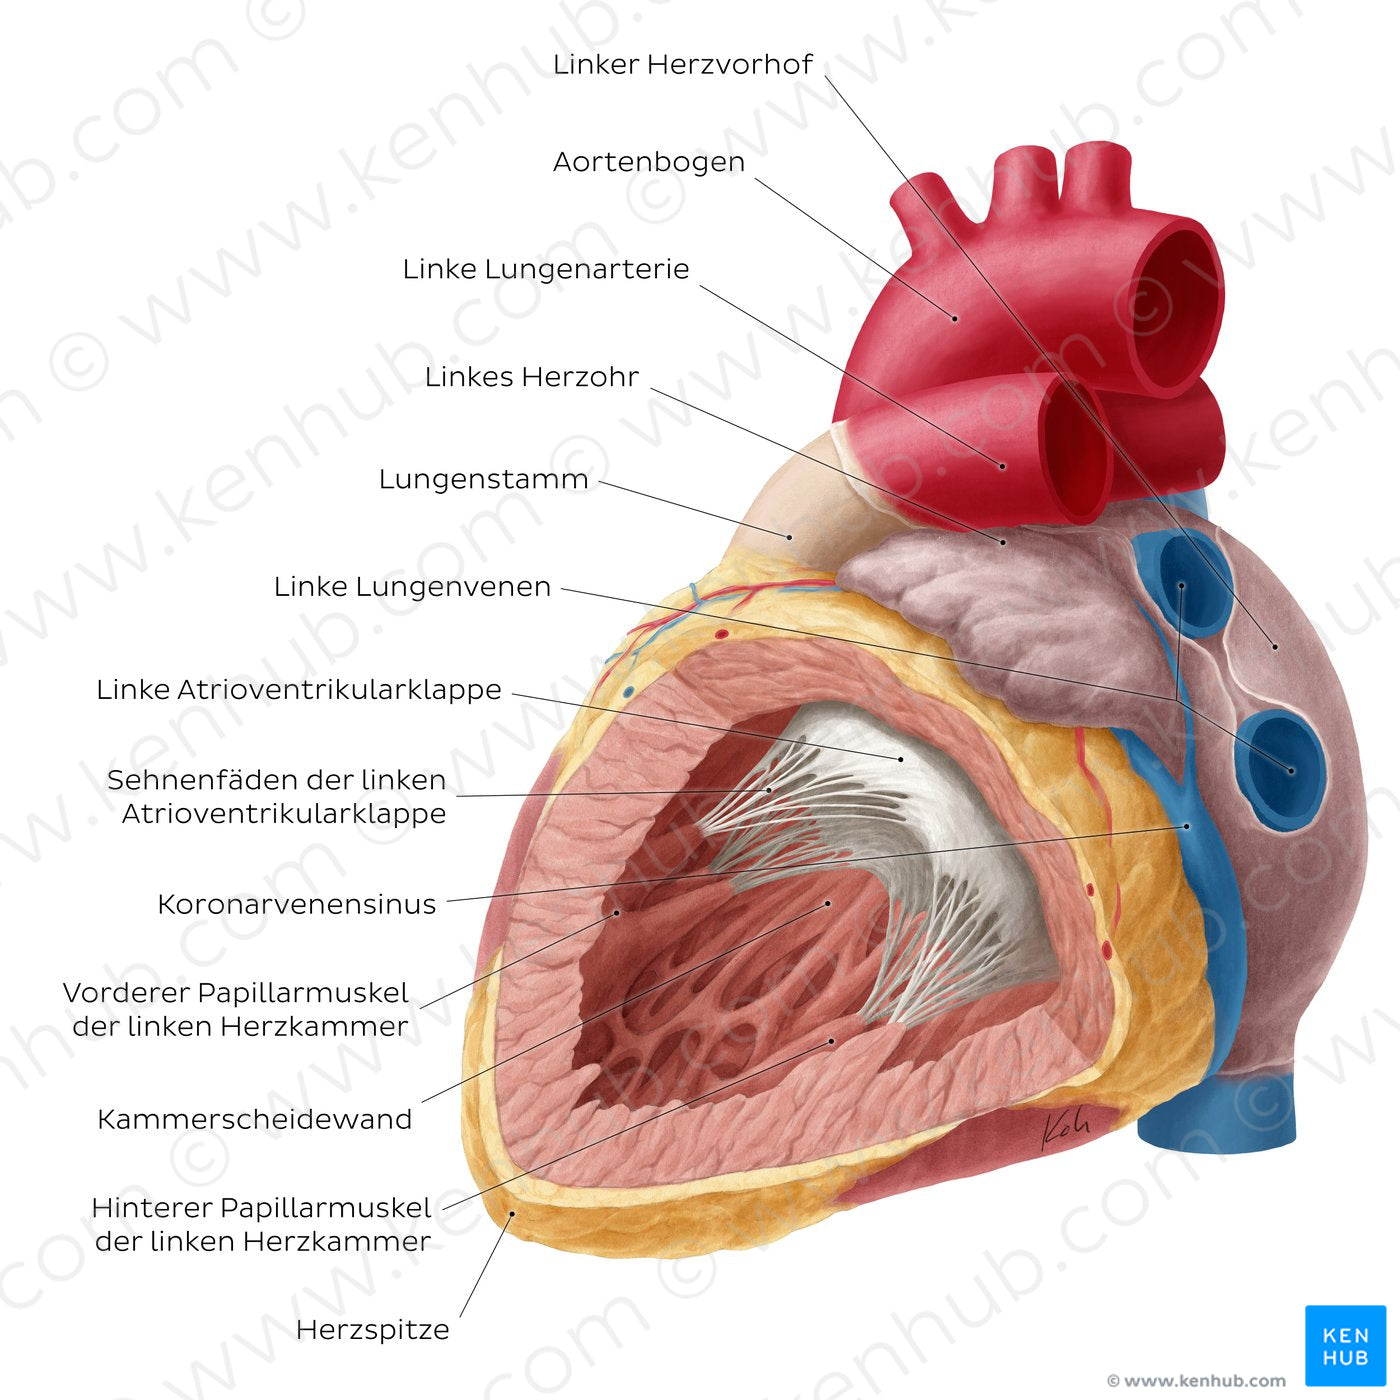 Heart: Left ventricle (German)